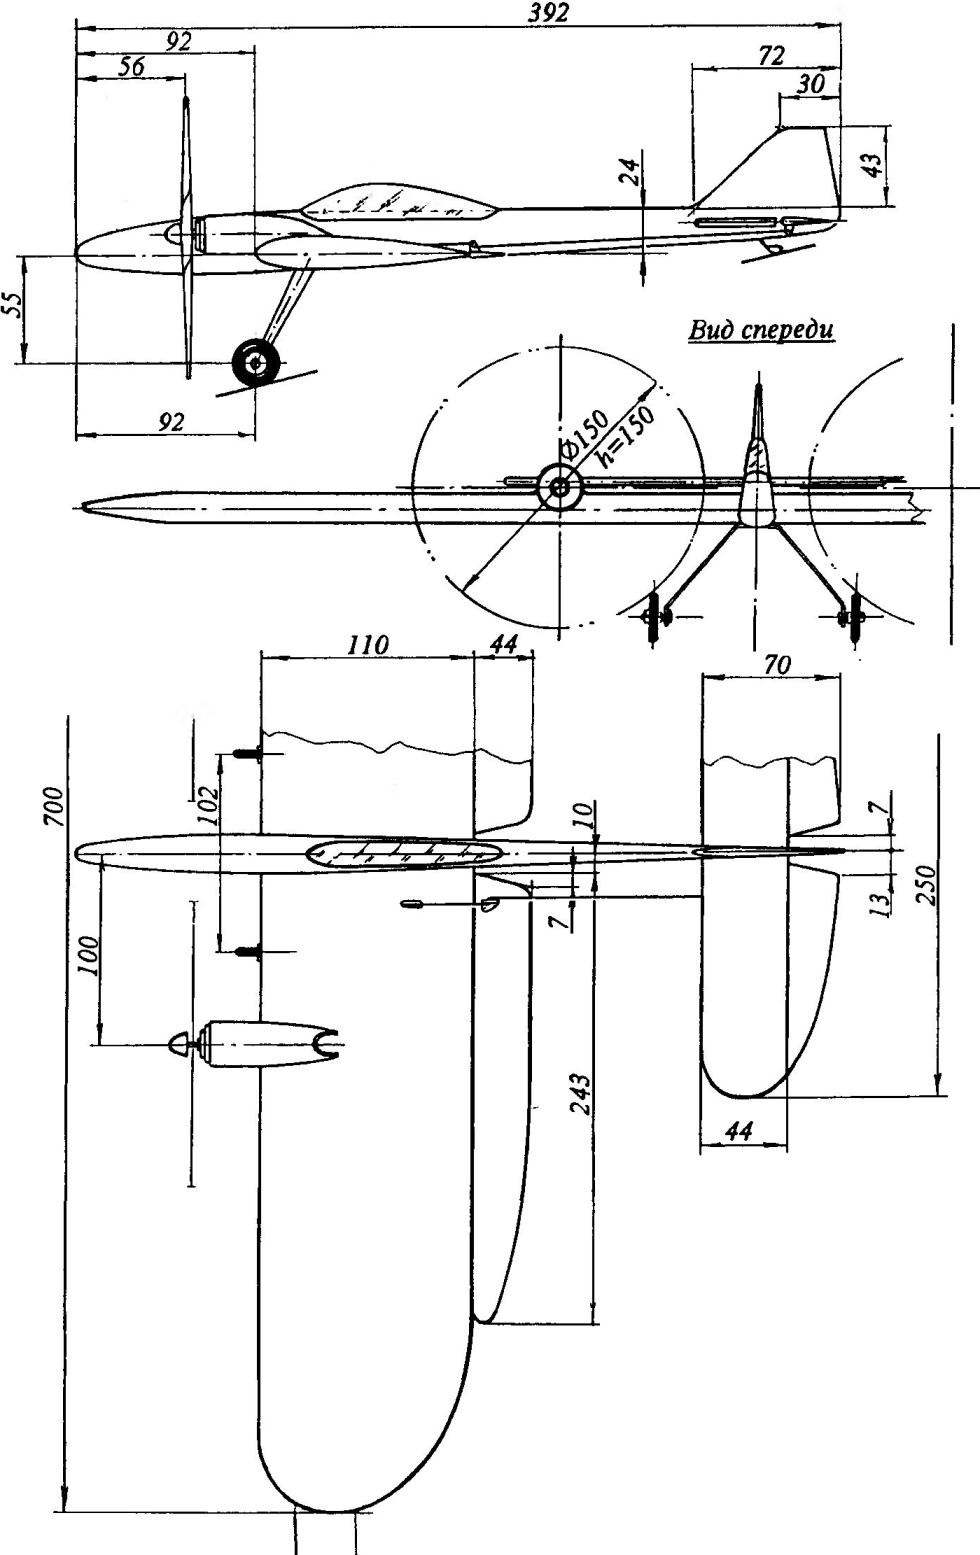 Twin-engine aerobatic control line model with electric drive and external power supply